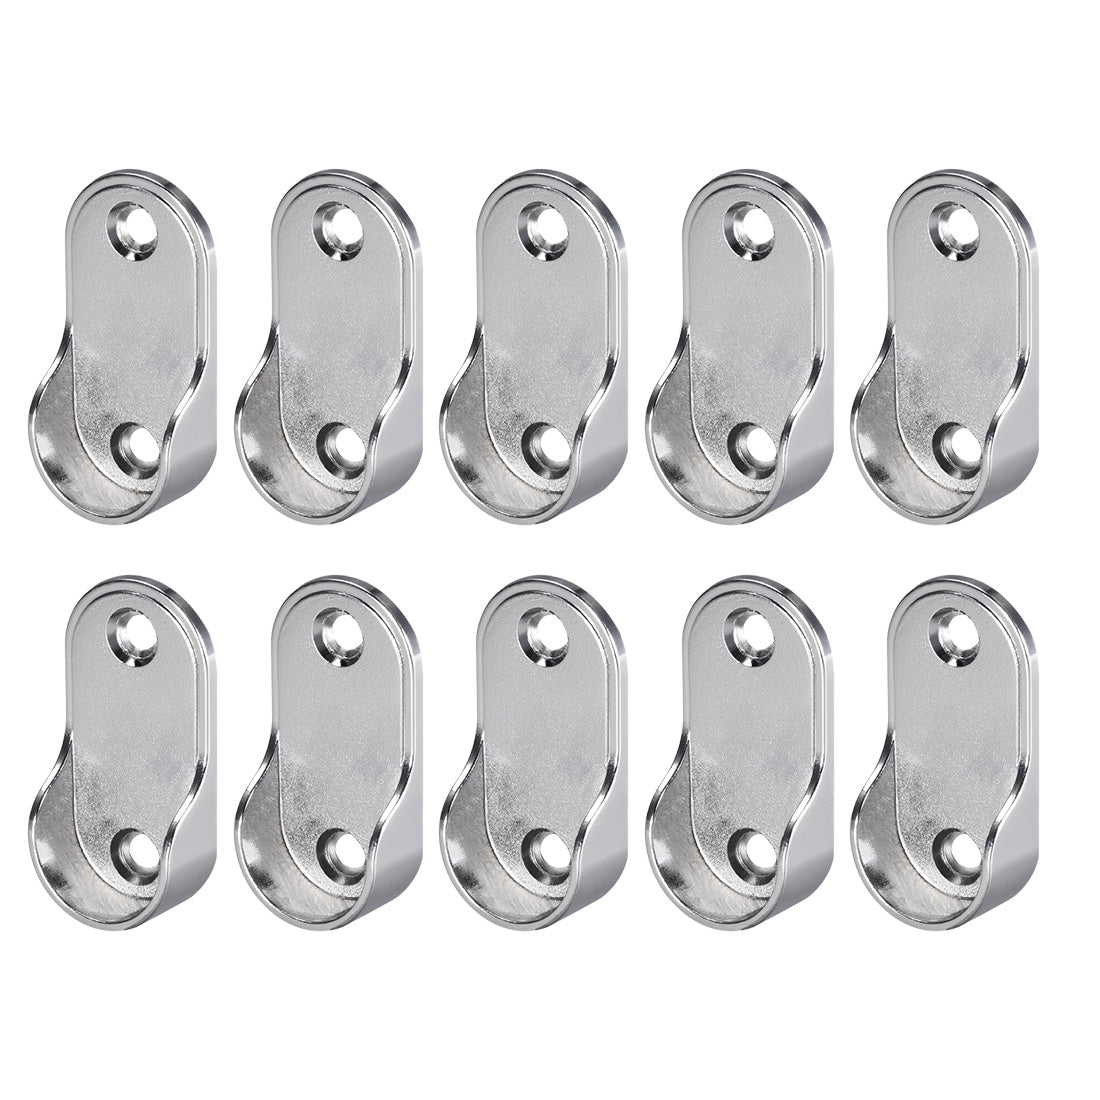 uxcell Uxcell Zinc Alloy Oval Closet Rod End Supports, Fit Rod Dia 25mm 10 PCS - Wardrobe Rod Flange Bracket Support